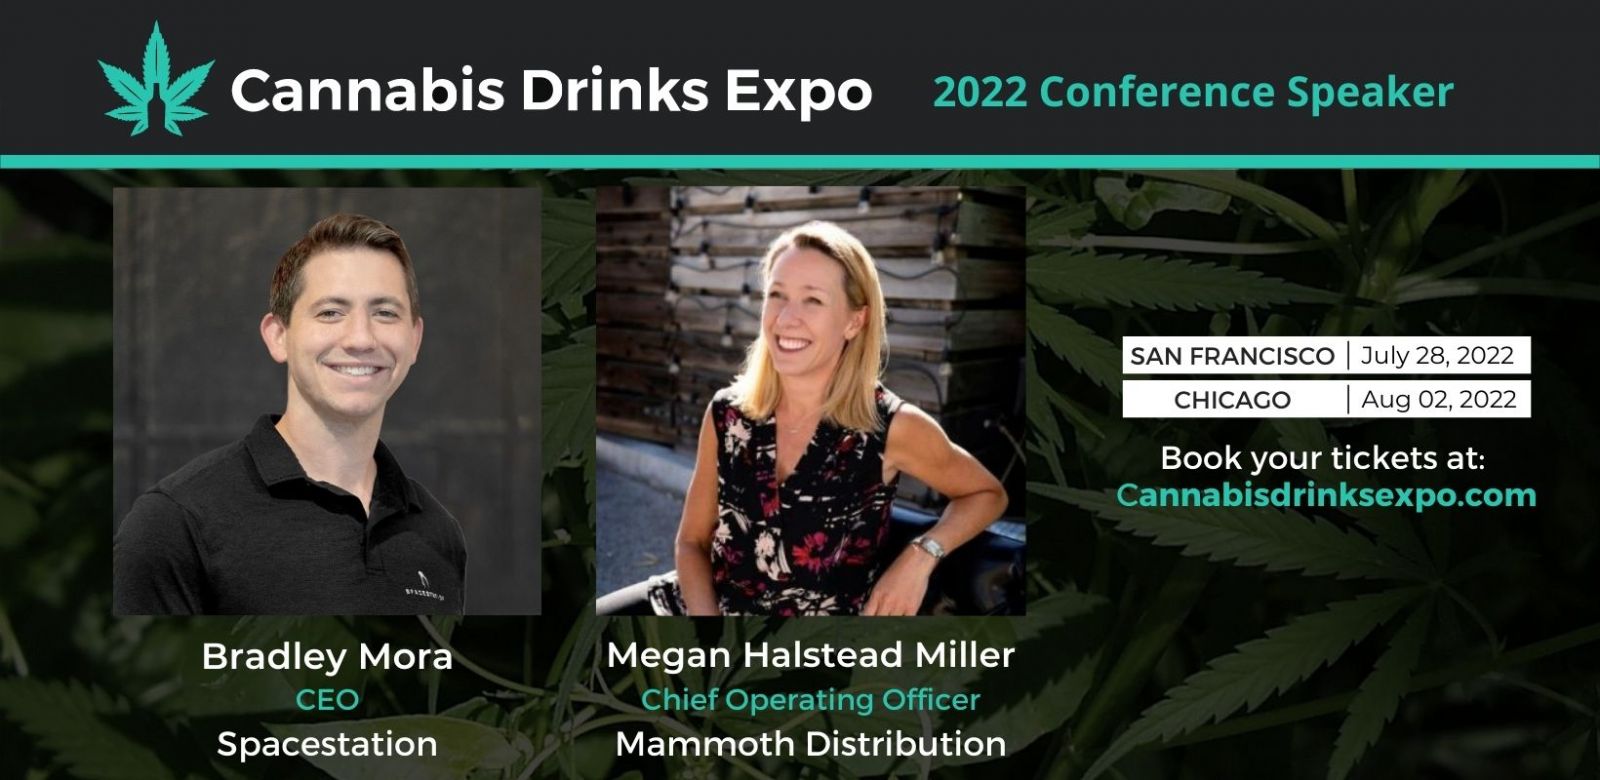 Photo for: Bradley Mora, CEO of Spacestation scheduled to speak at the 2022 Cannabis Drinks Expo.